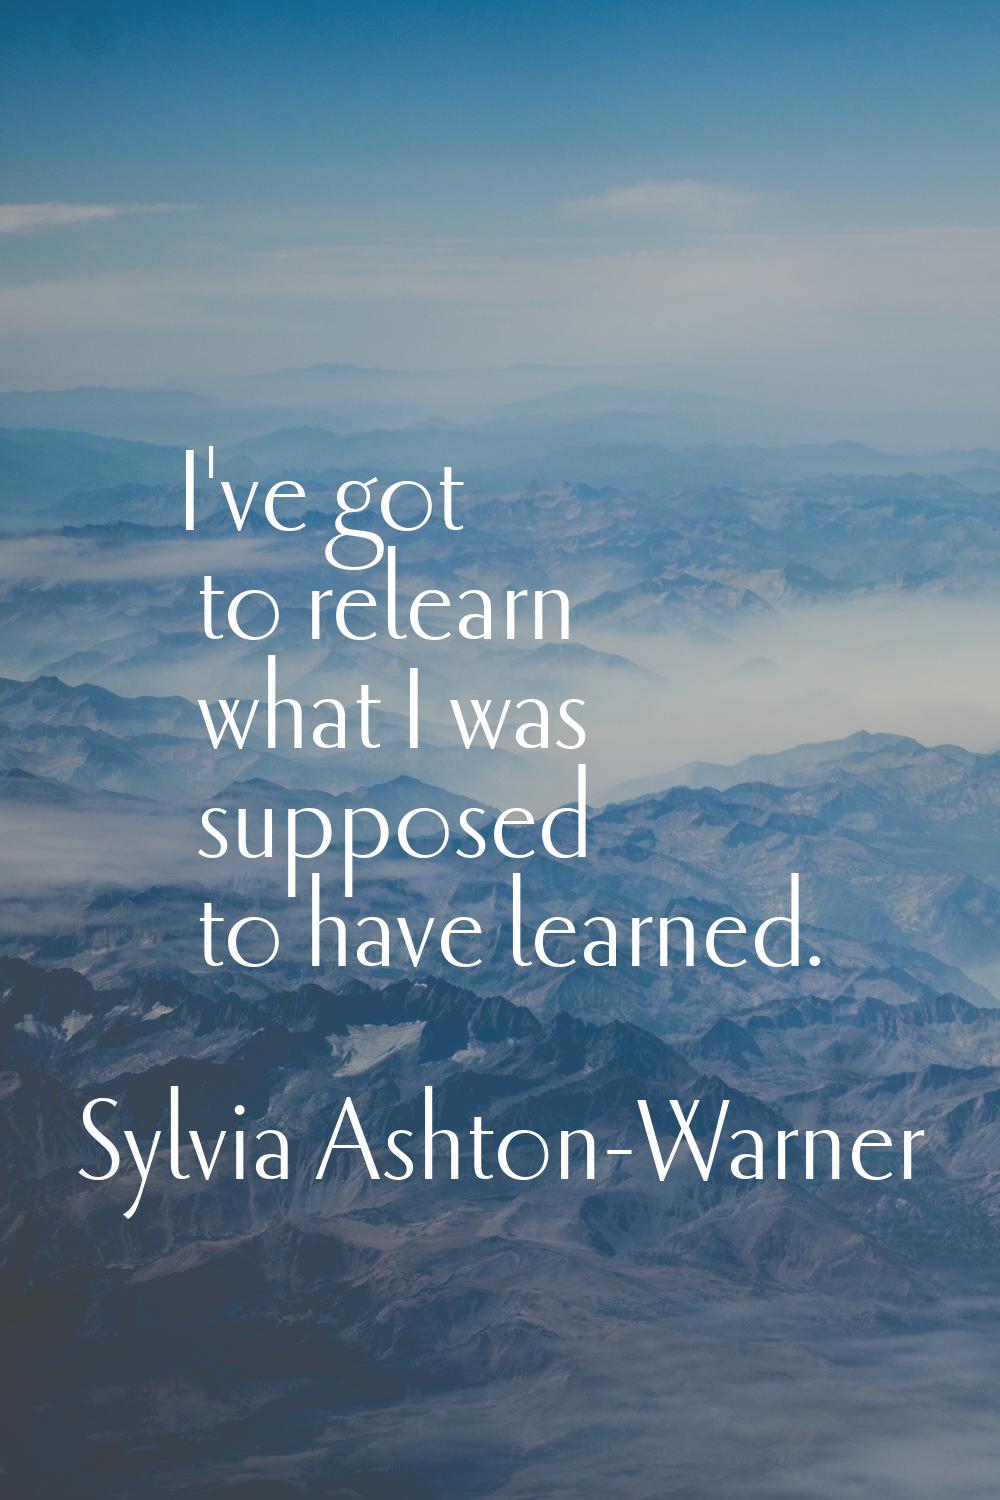 I've got to relearn what I was supposed to have learned.